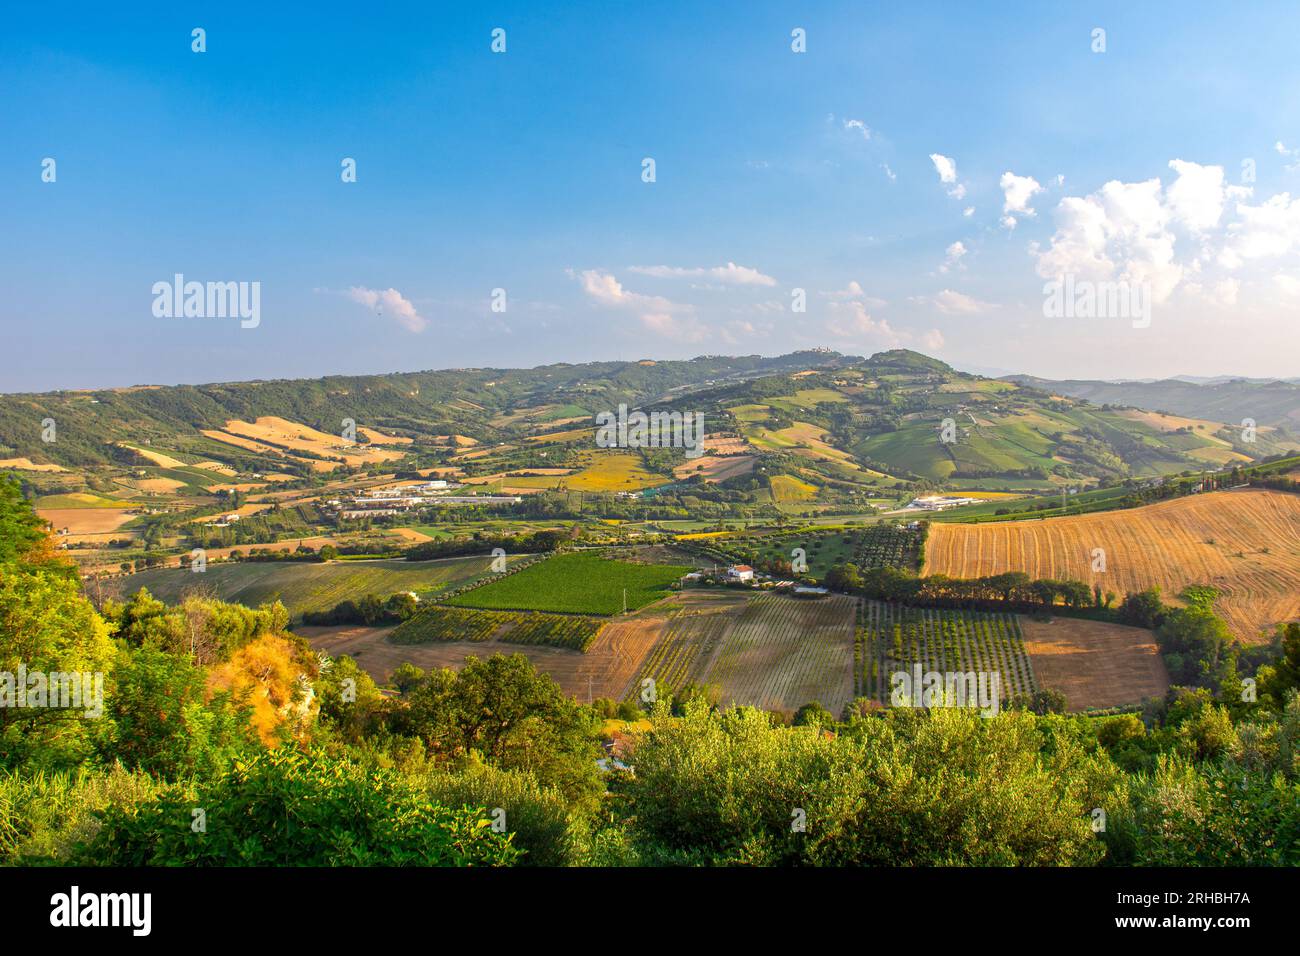 Lanscape in Italy, Marche province from Massignano, rural landscape. Stock Photo